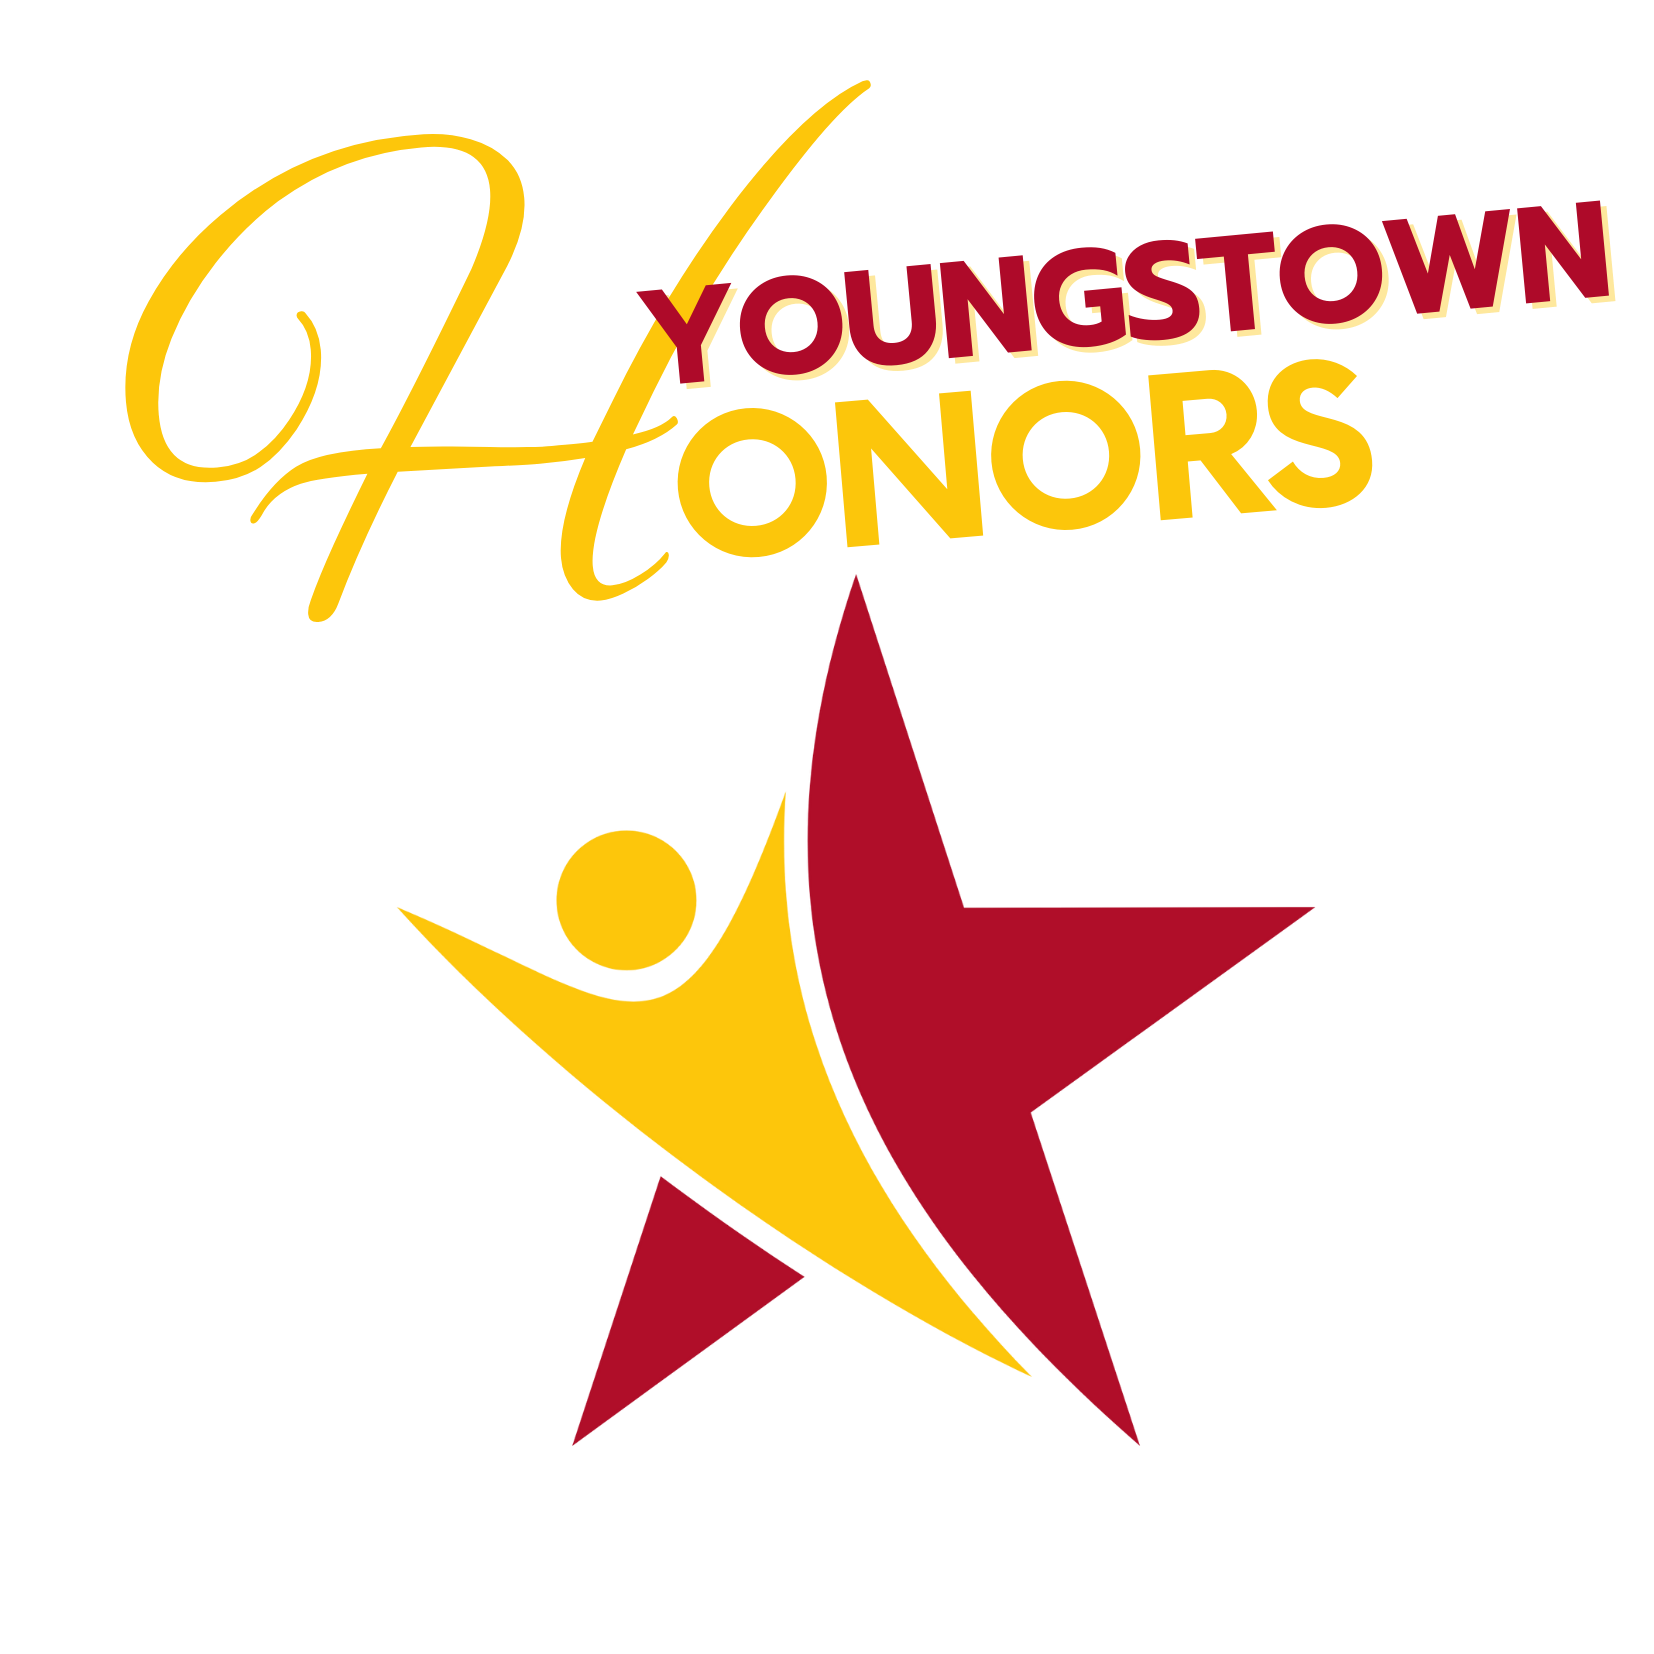 YOUNGSTOWN HONORS LOGO